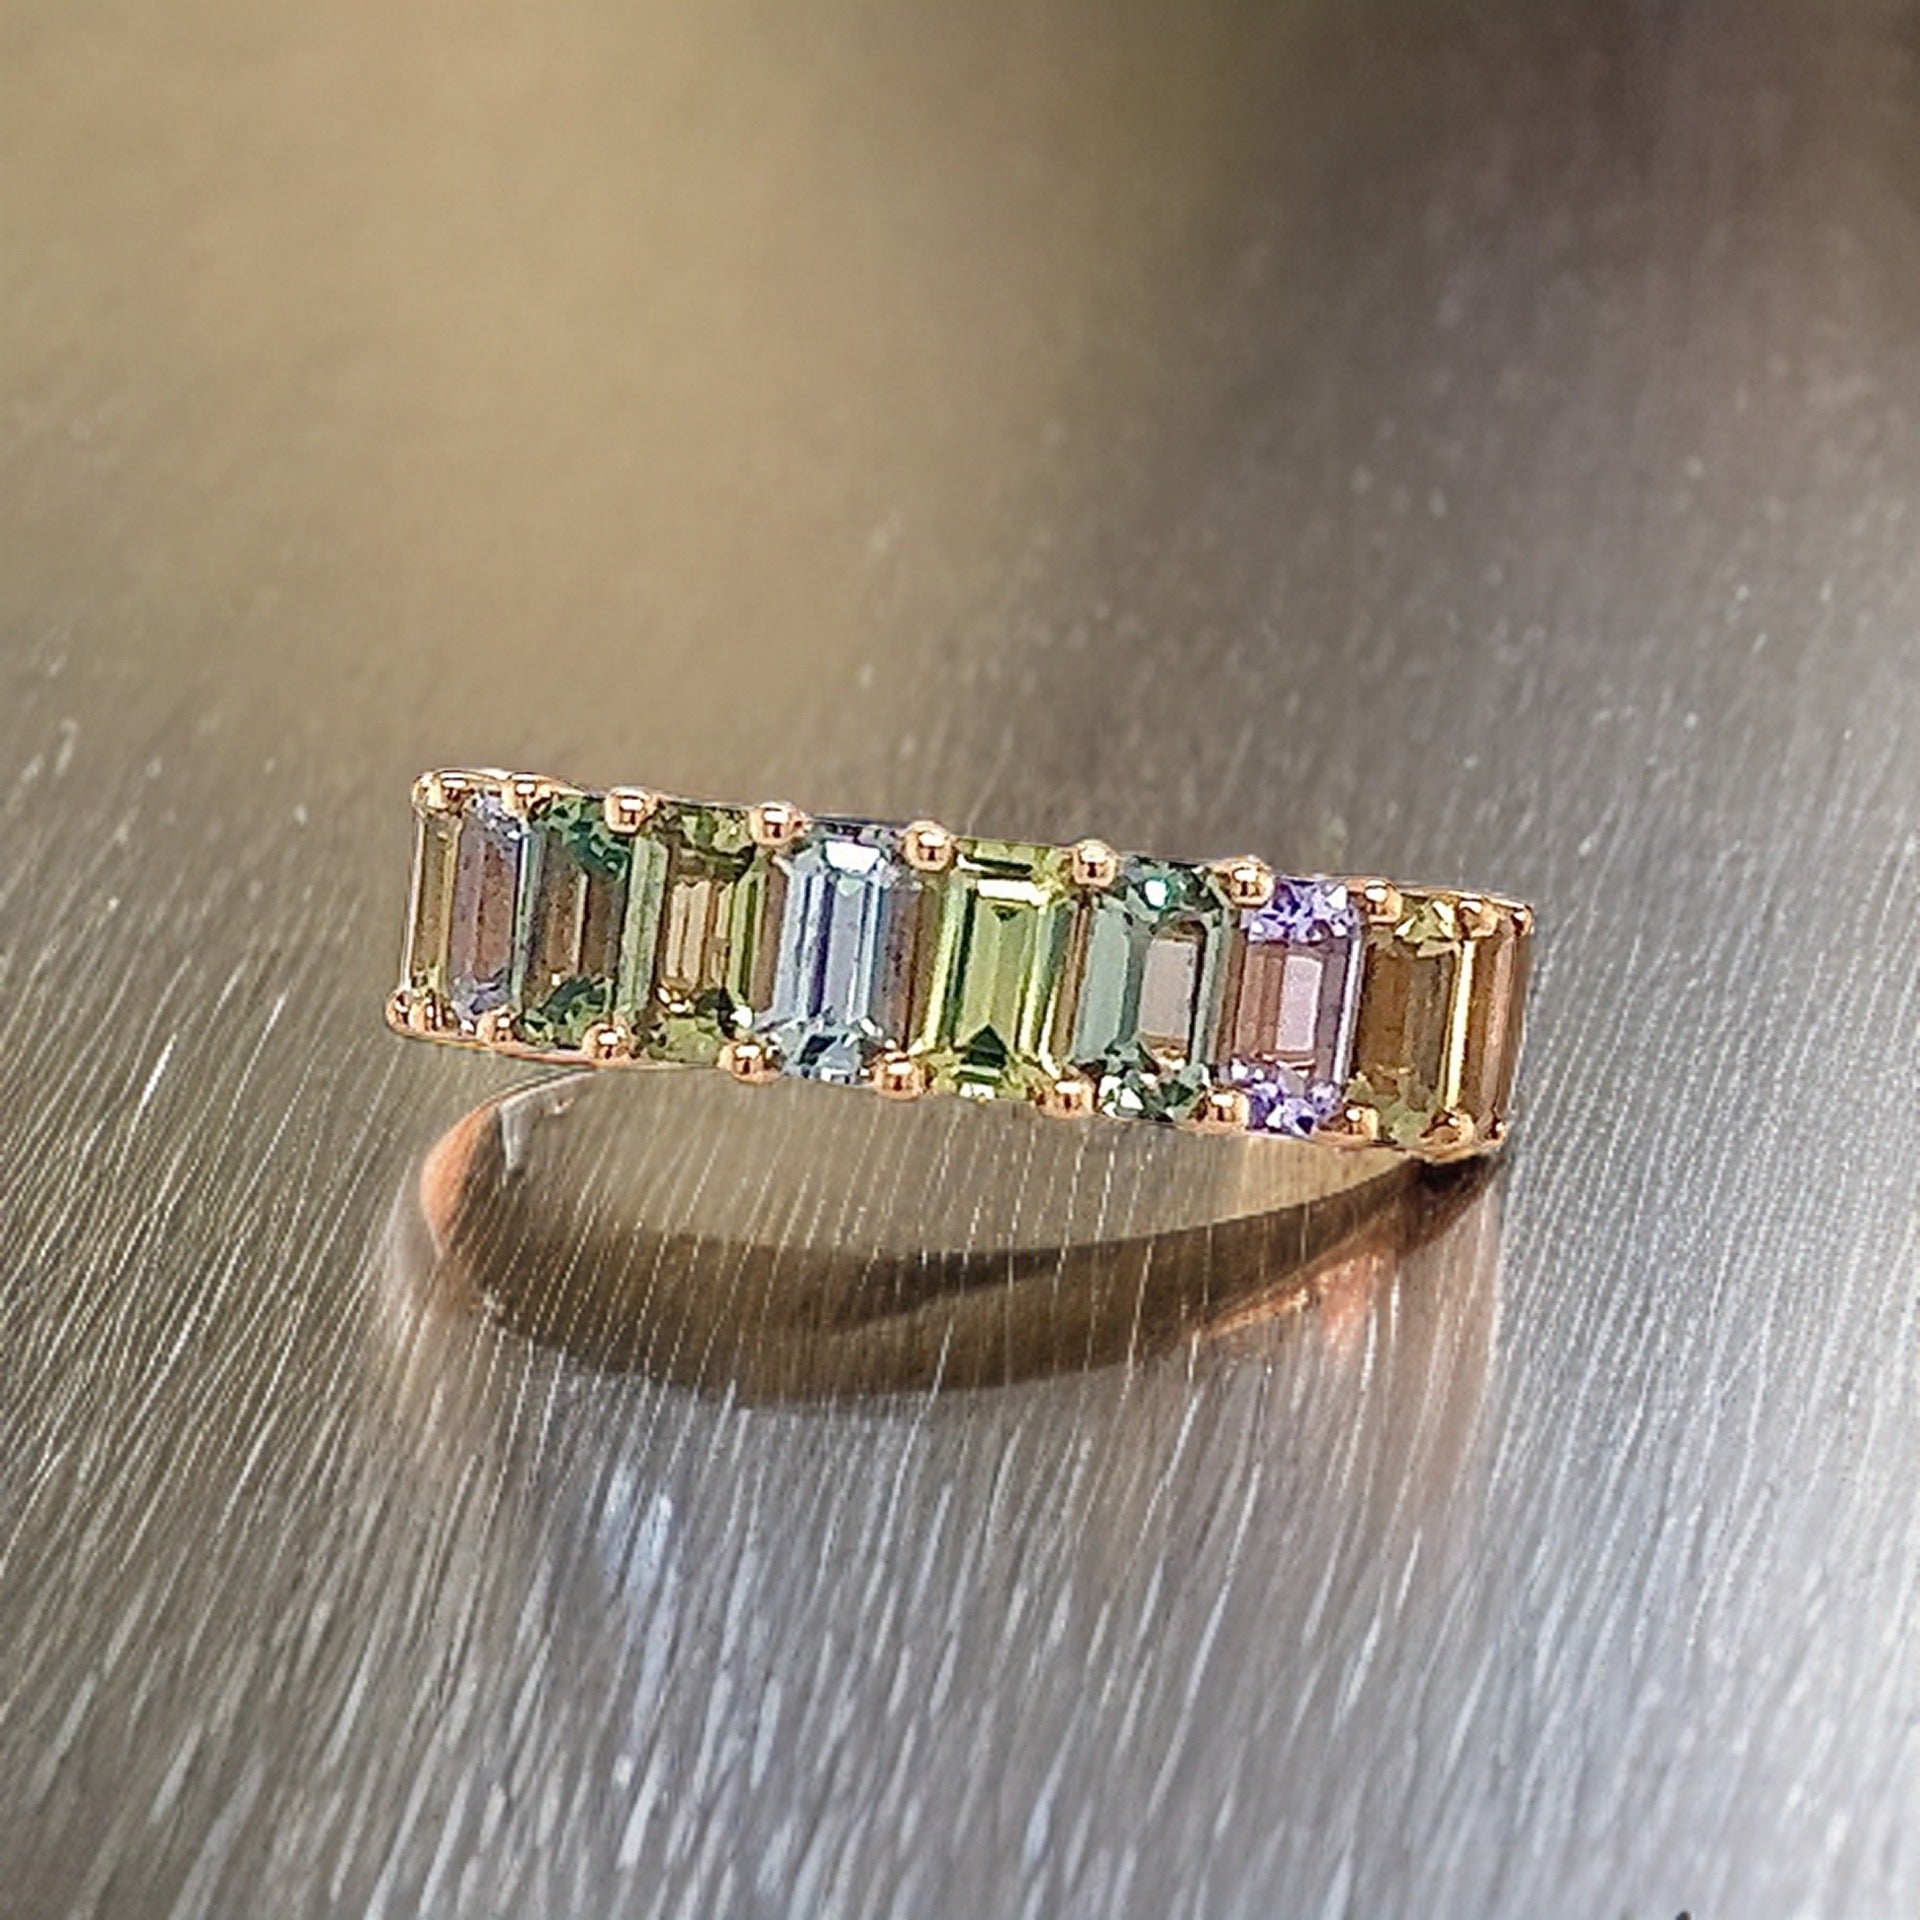 Natural Multicolored Sapphire Ring Size 6.5 14k Y Gold 5.28 TCW Certified $3,950 217066 - Certified Fine Jewelry